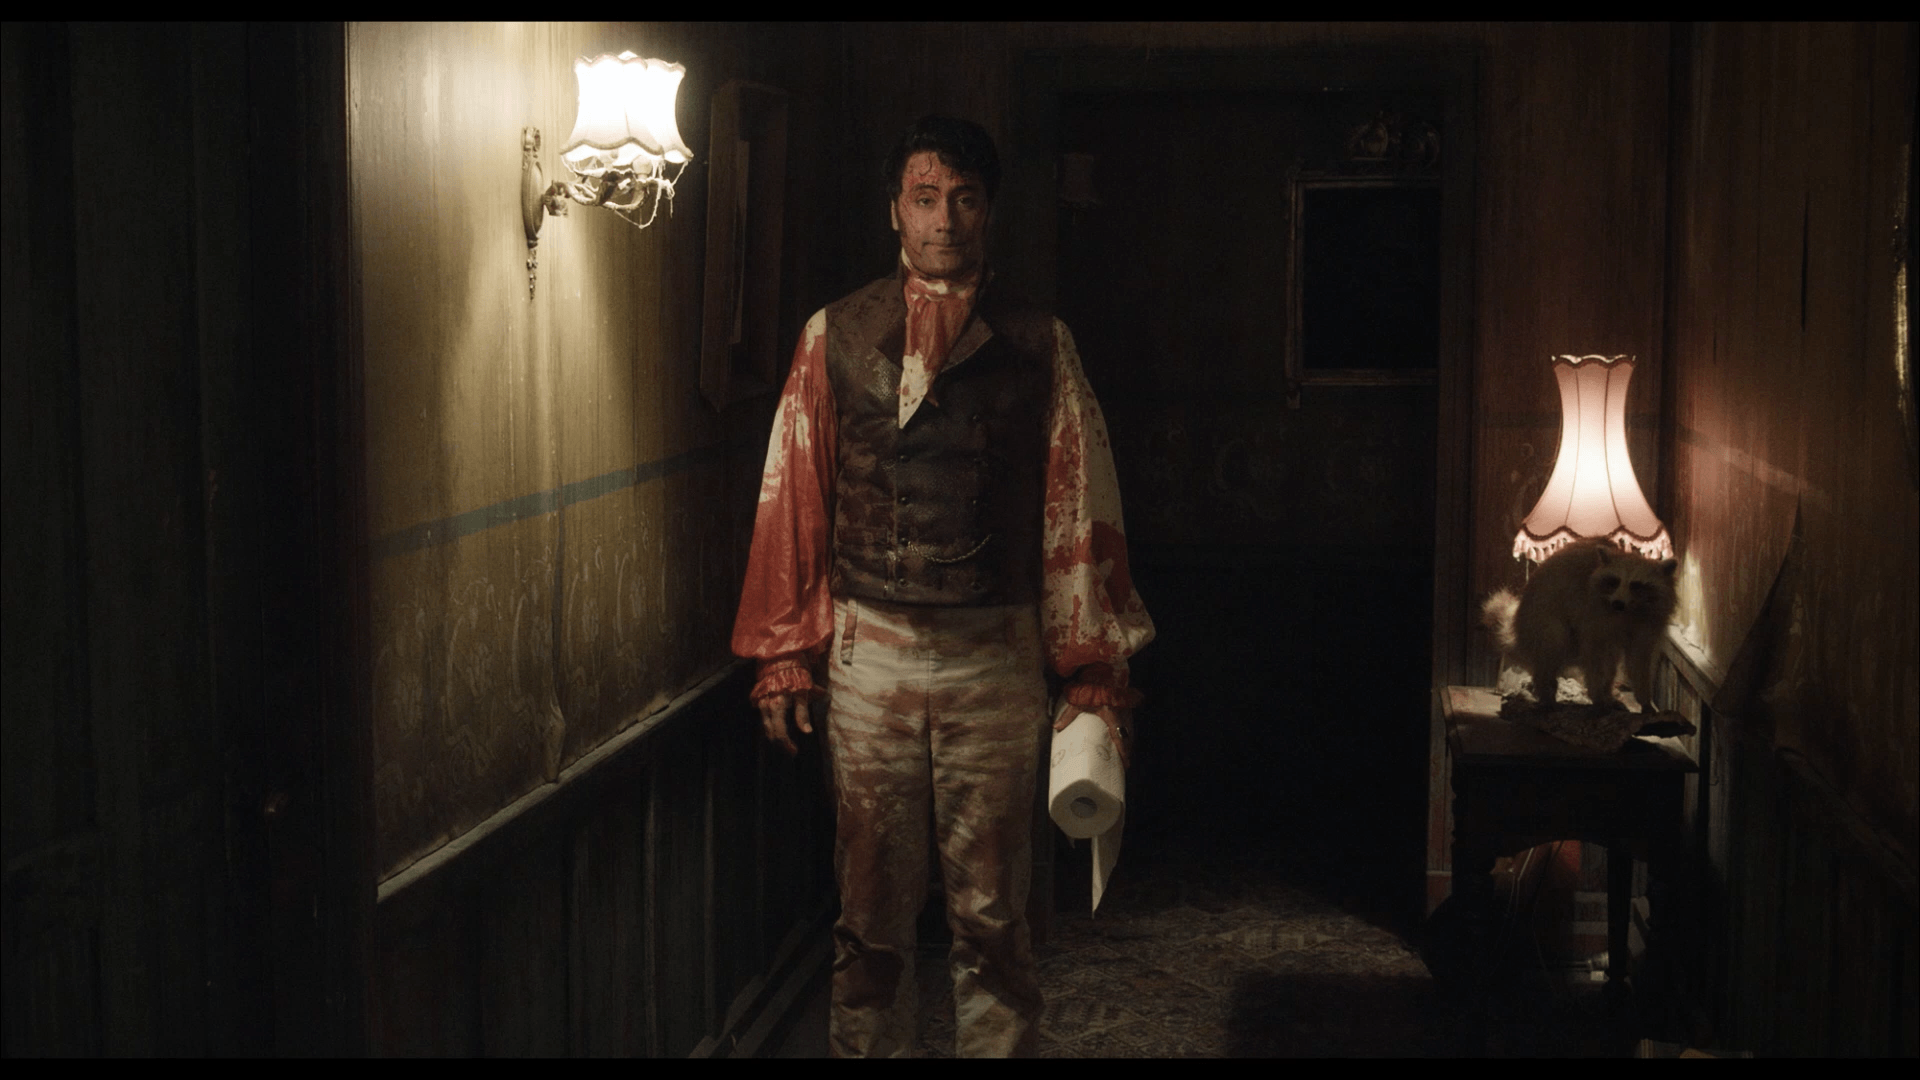 What We Do In The Shadows, 2014